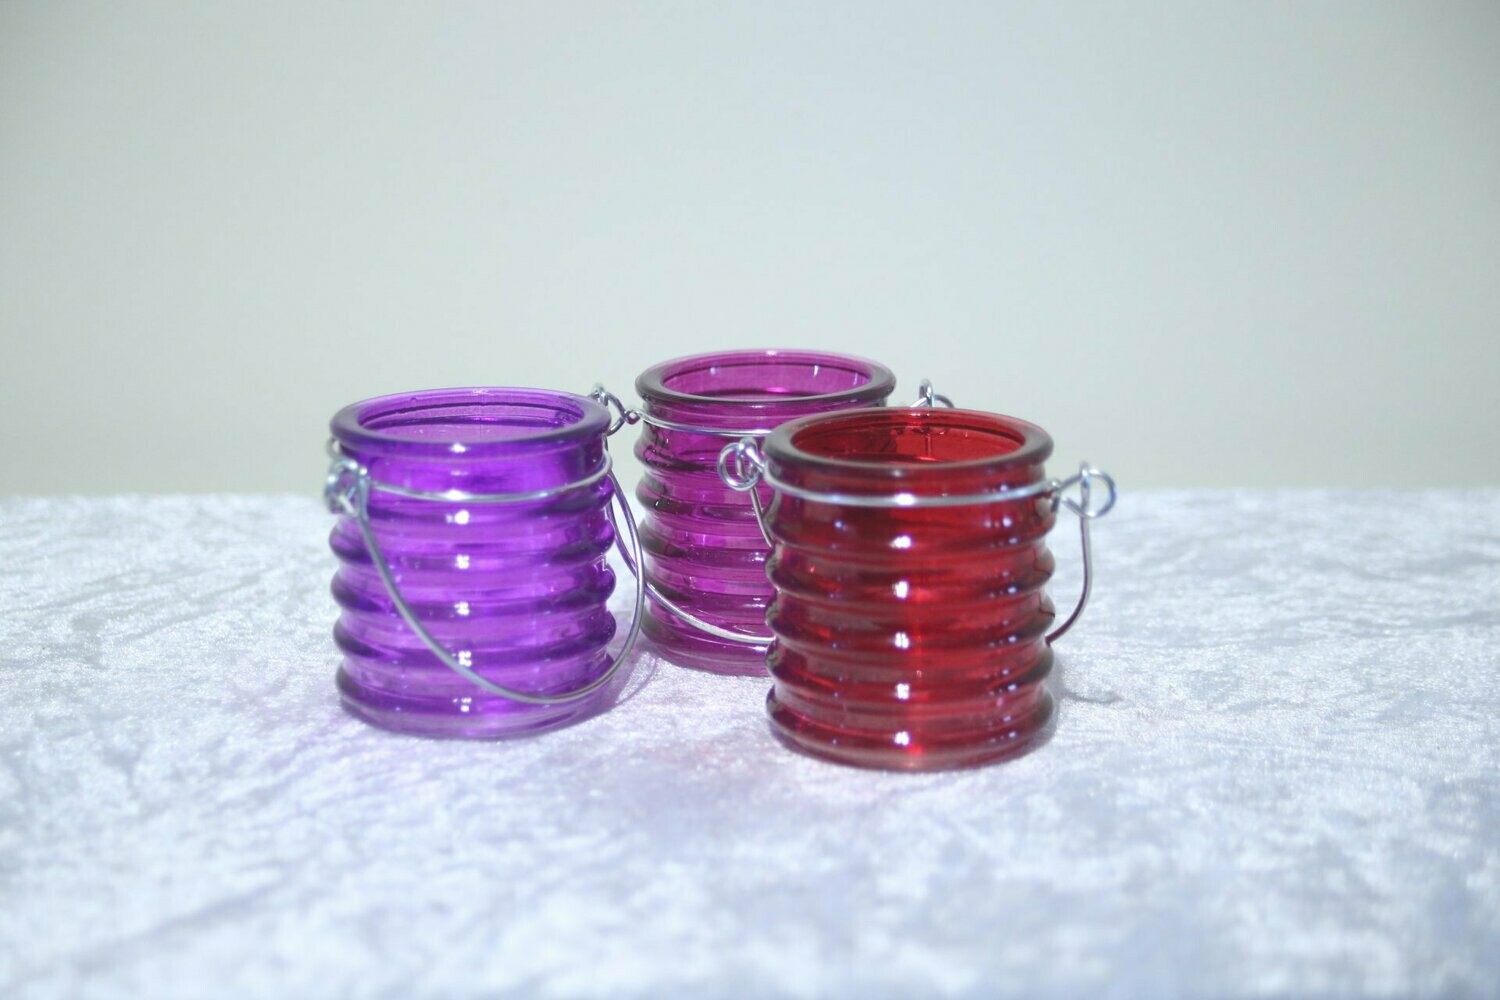 Set of 3 Small Glass Tealight Holders